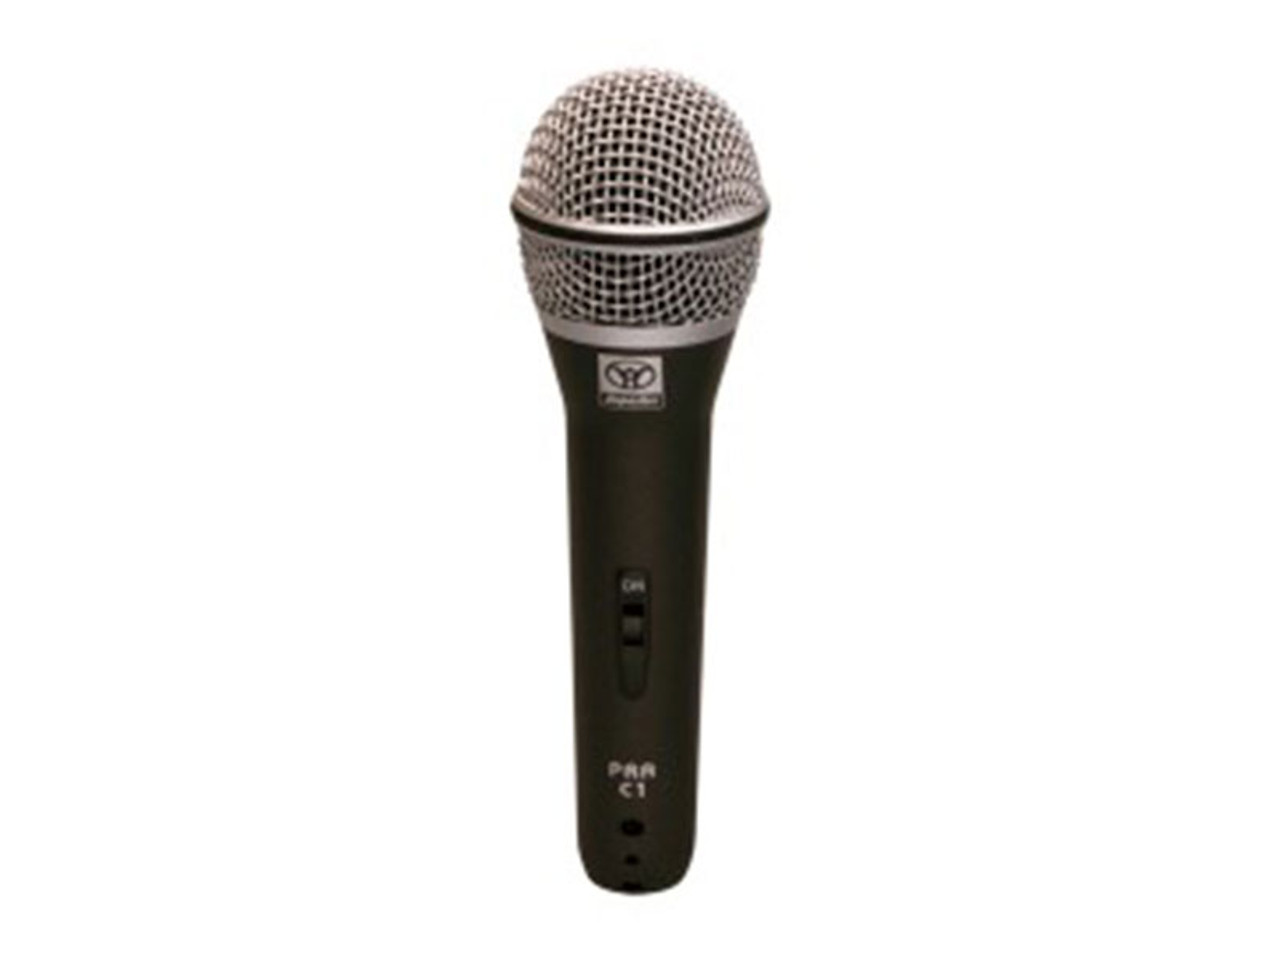 Avlex PRA-C1Supercardiod Professional Dynamic Vocal Microphone With On/Oﬀ Switch